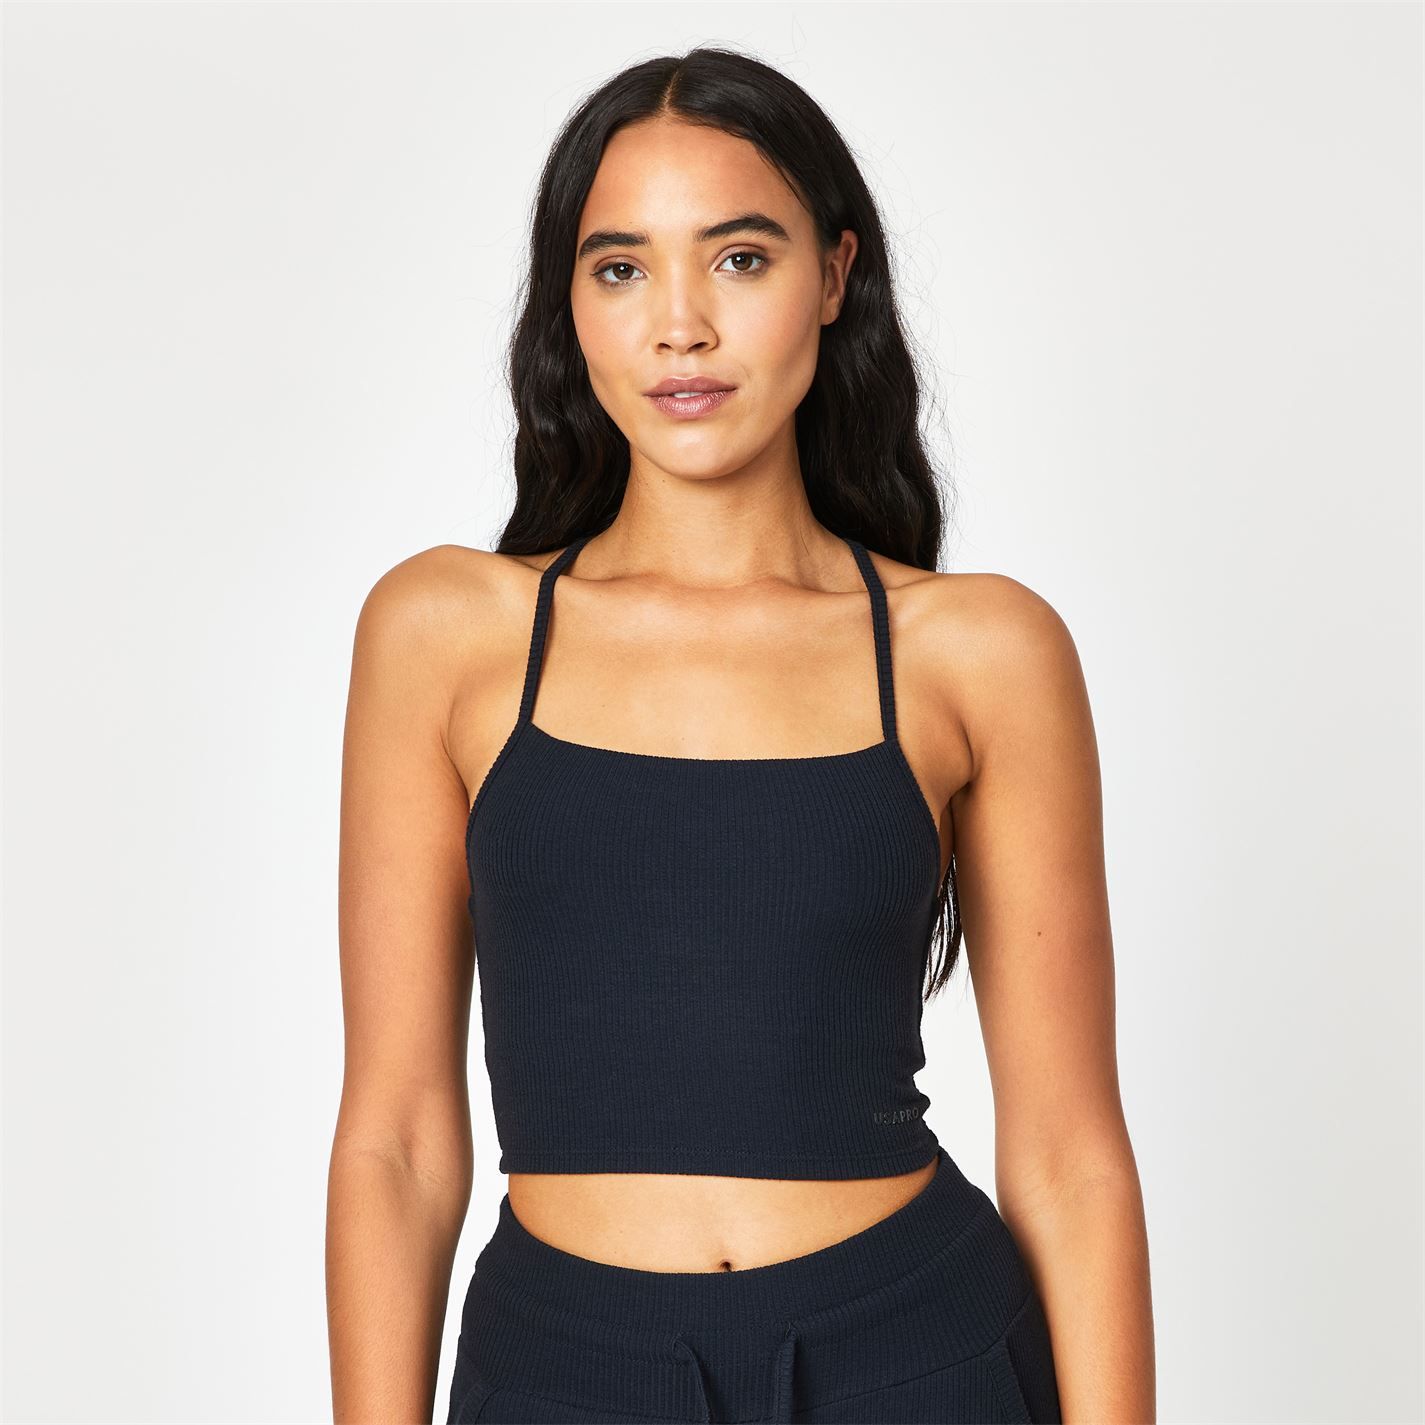 Take comfort to the next level with the USA Pro ribbed crop top, featuring a fashionably flattering square neckline. The soft-touch fabric and ribbed design will keep you feeling cosy while a unique strap detail features a stylish twist. Pair with the USA Pro ribbed joggers for a complete loungewear set.